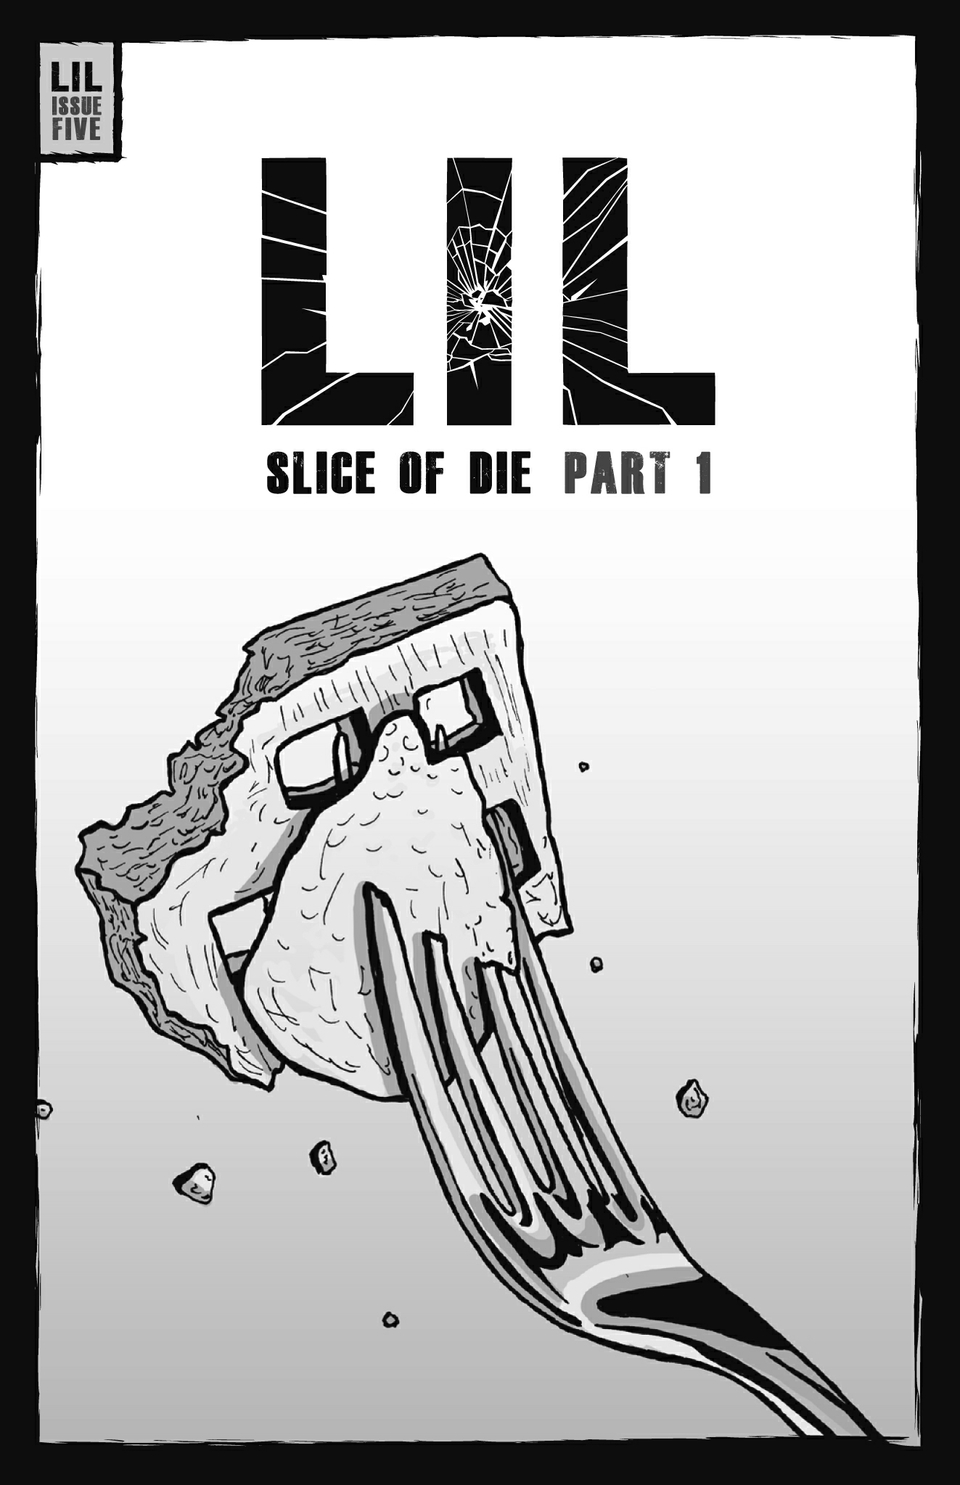 LIL - ISSUE 5 - SLICE OF DIE PART 1 - FRONT COVER